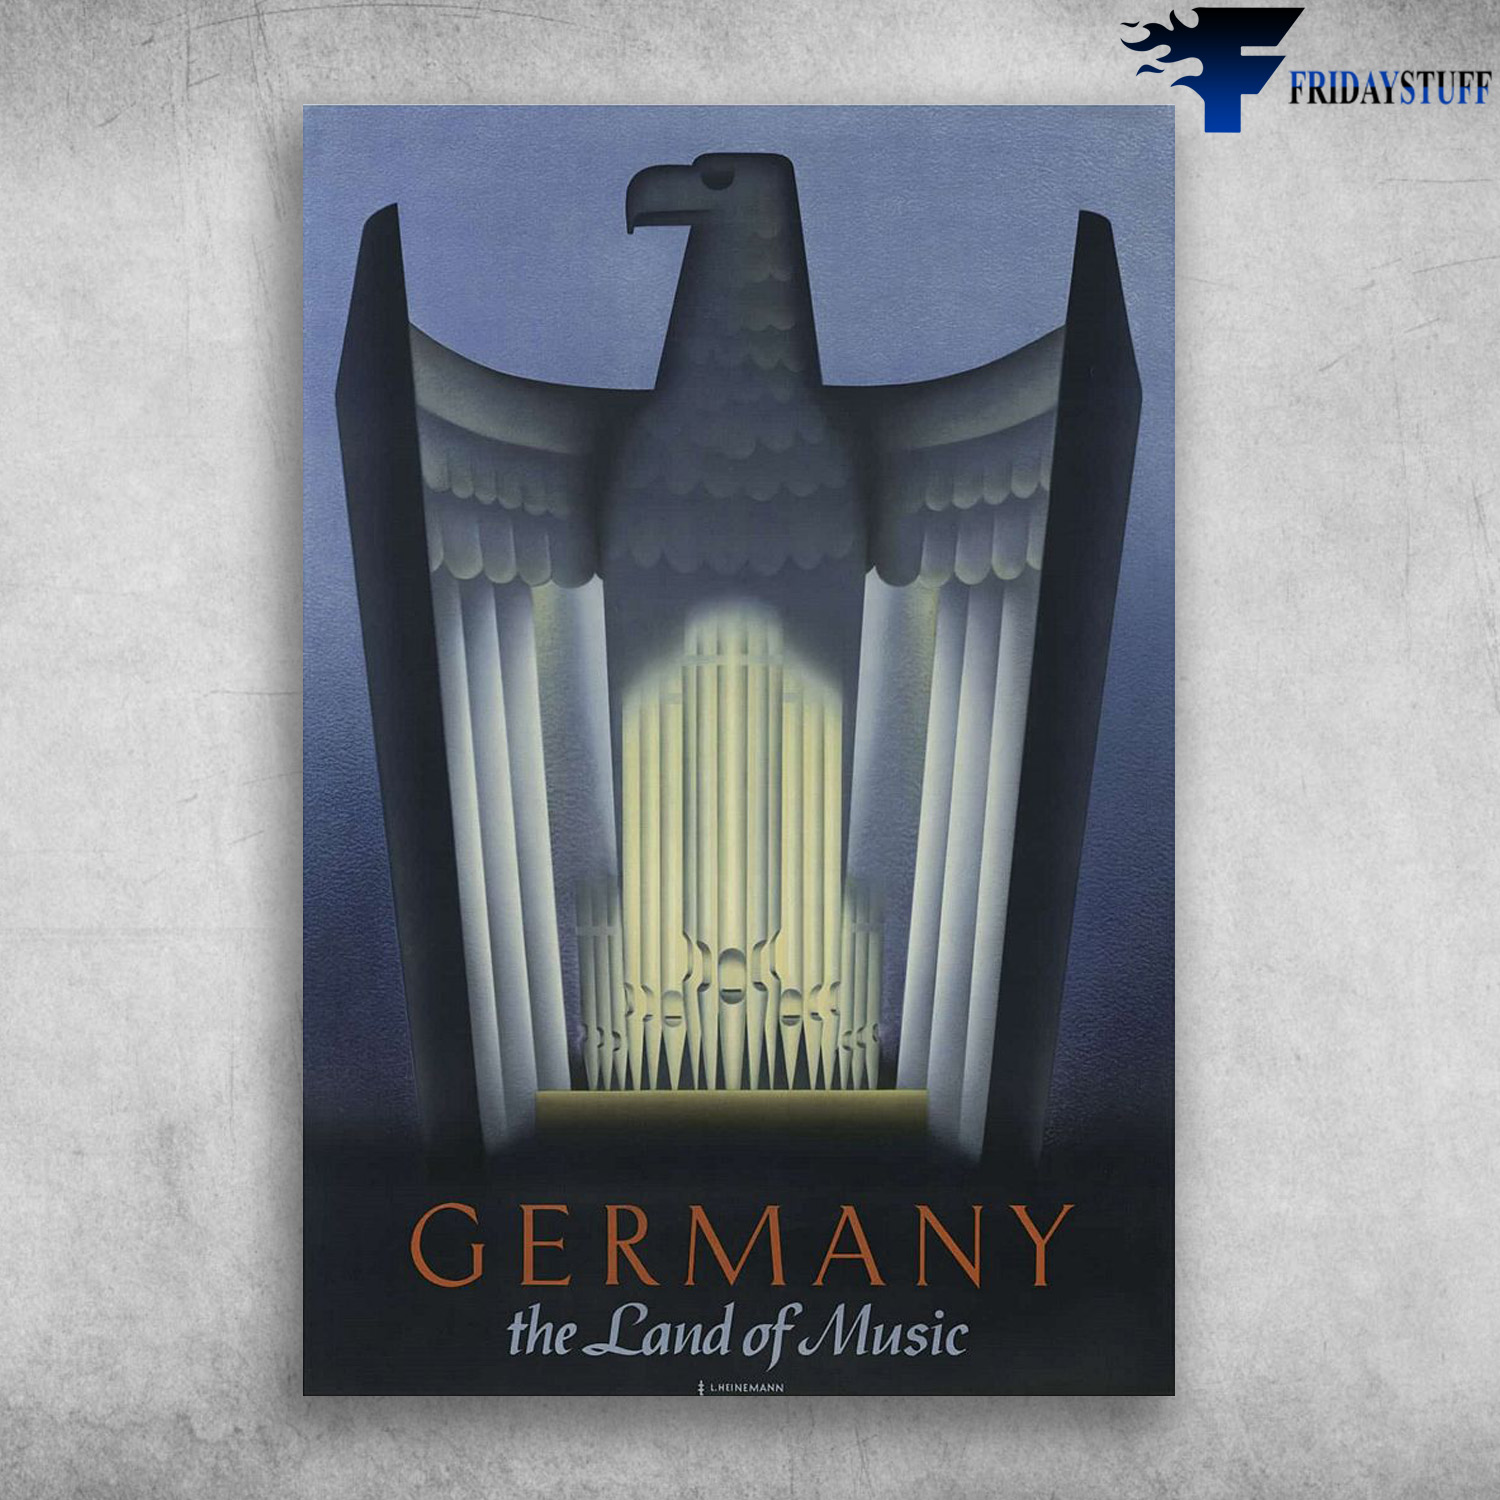 VINTAGE TRAVEL GERMANY REPRINT - Germany The Land Of Music